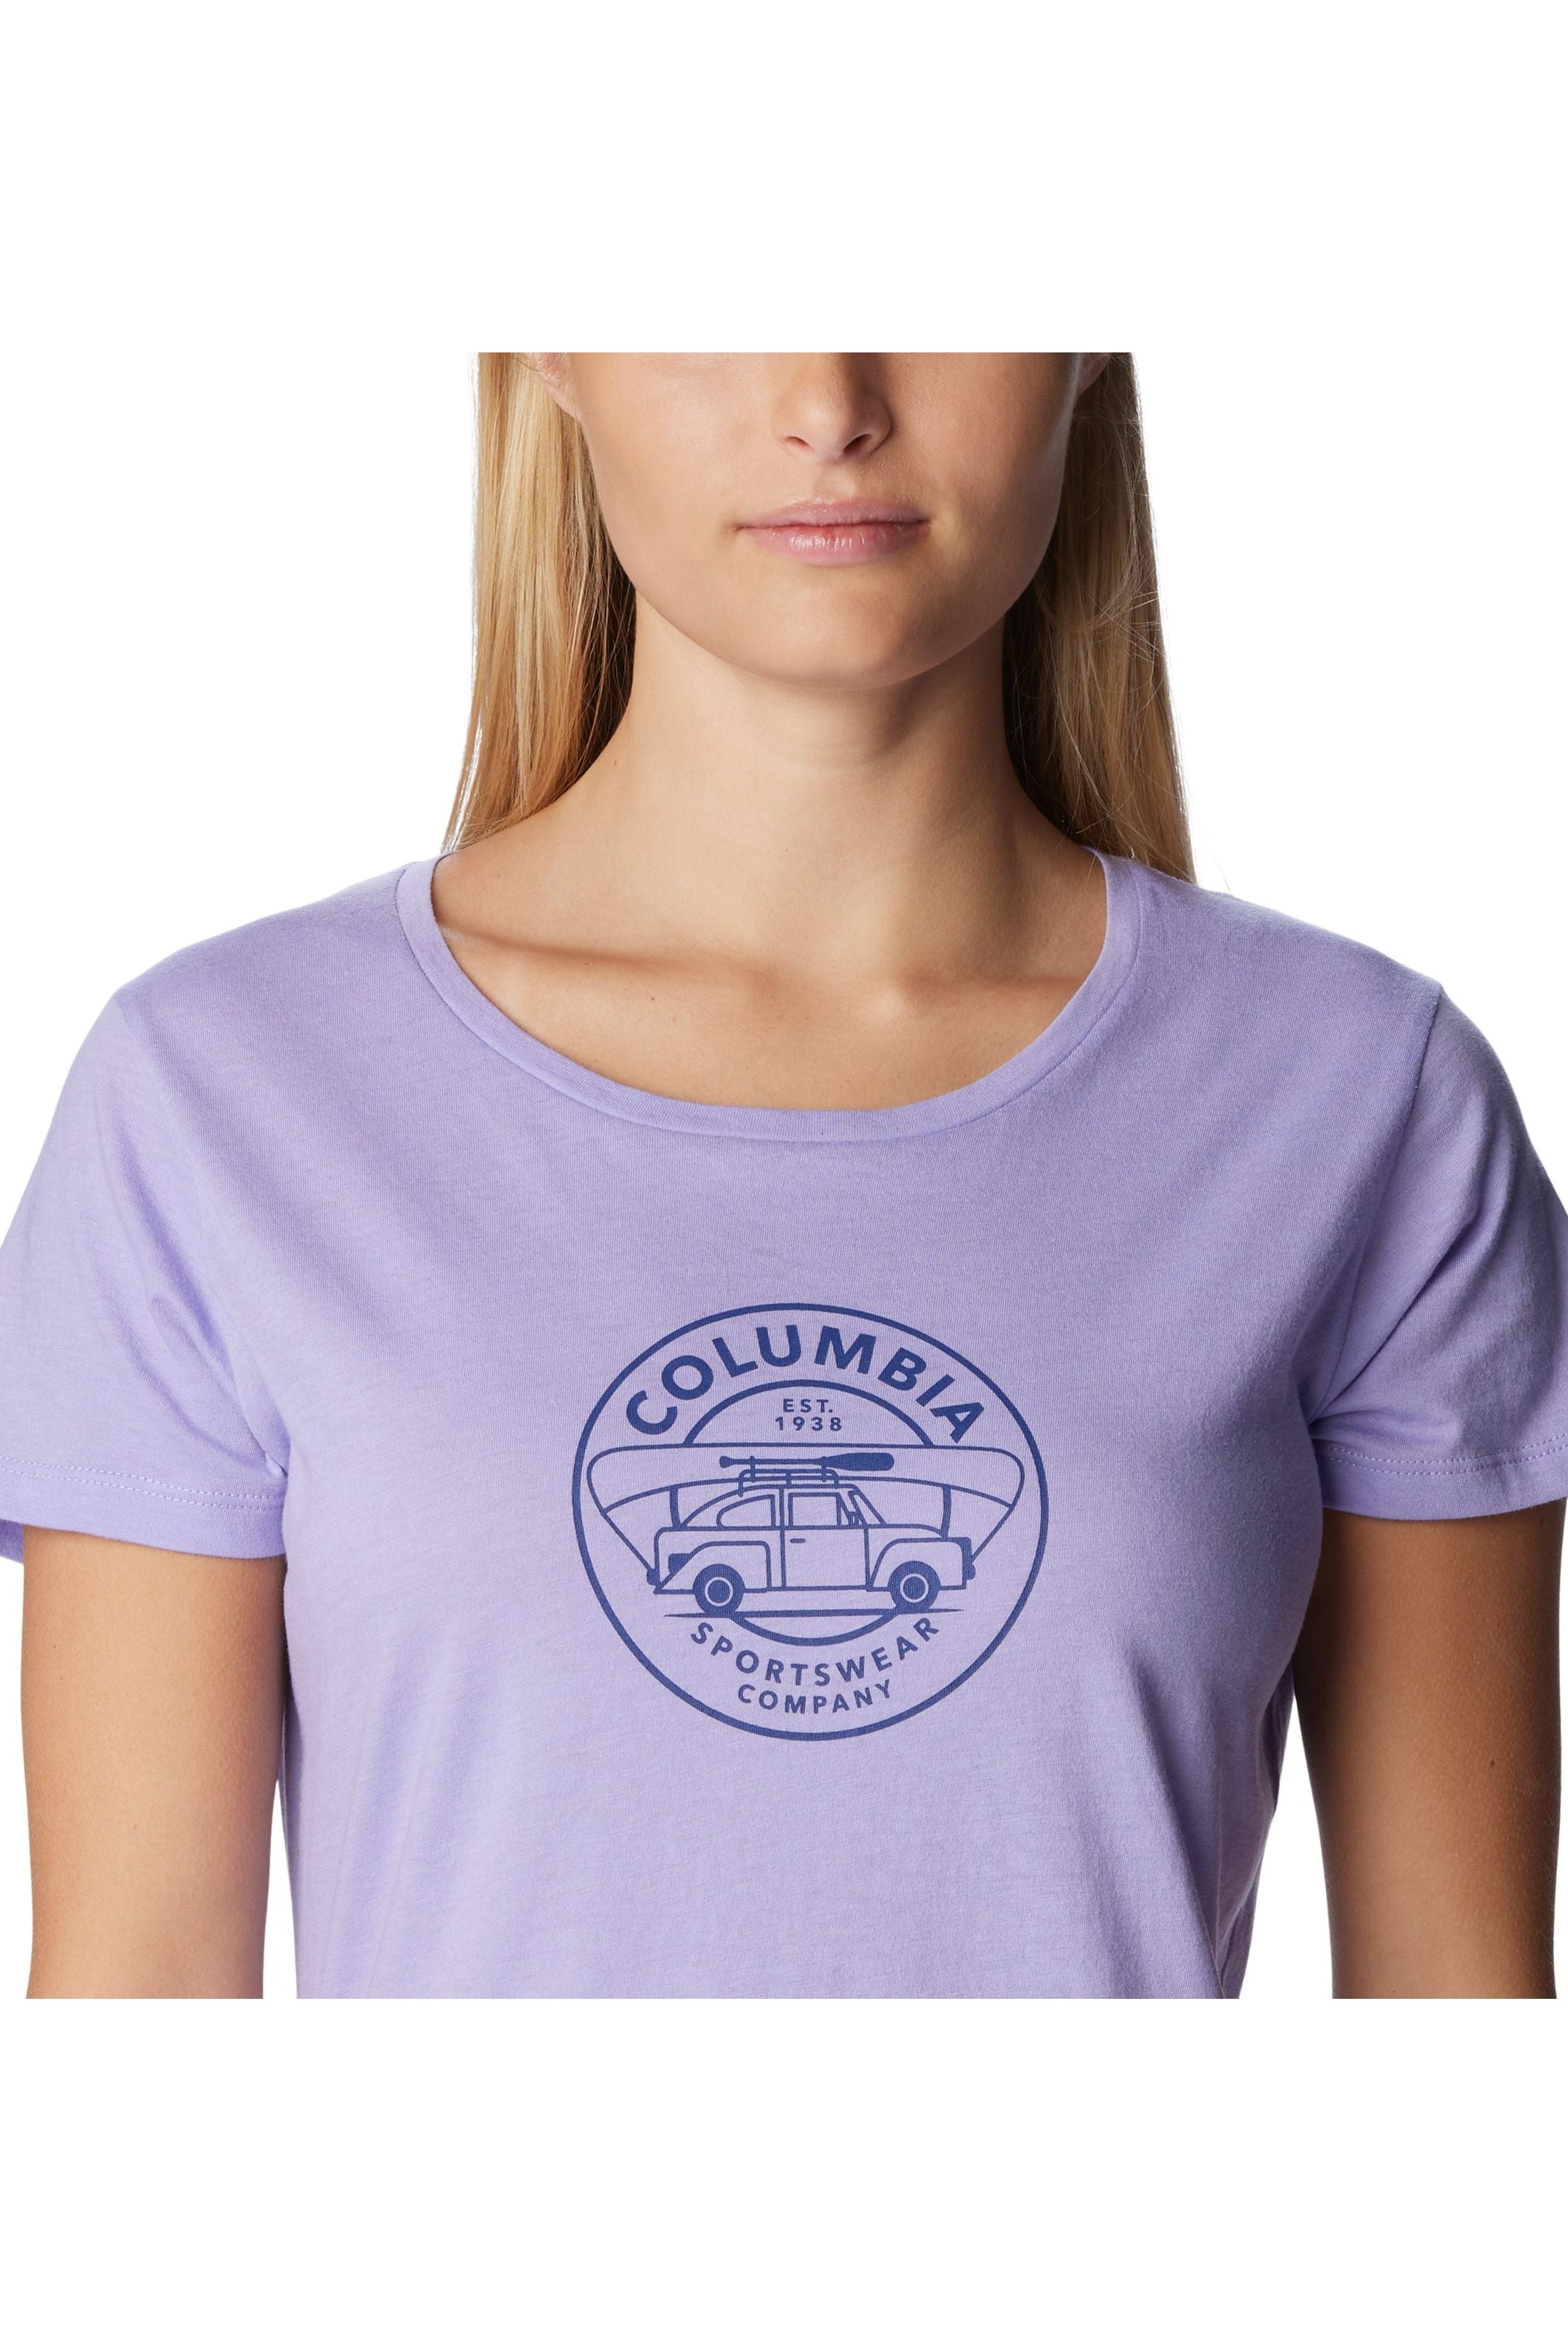 Columbia Graphic You Style - Days Boutique To – Close Daisy 1934591 T-Shirt